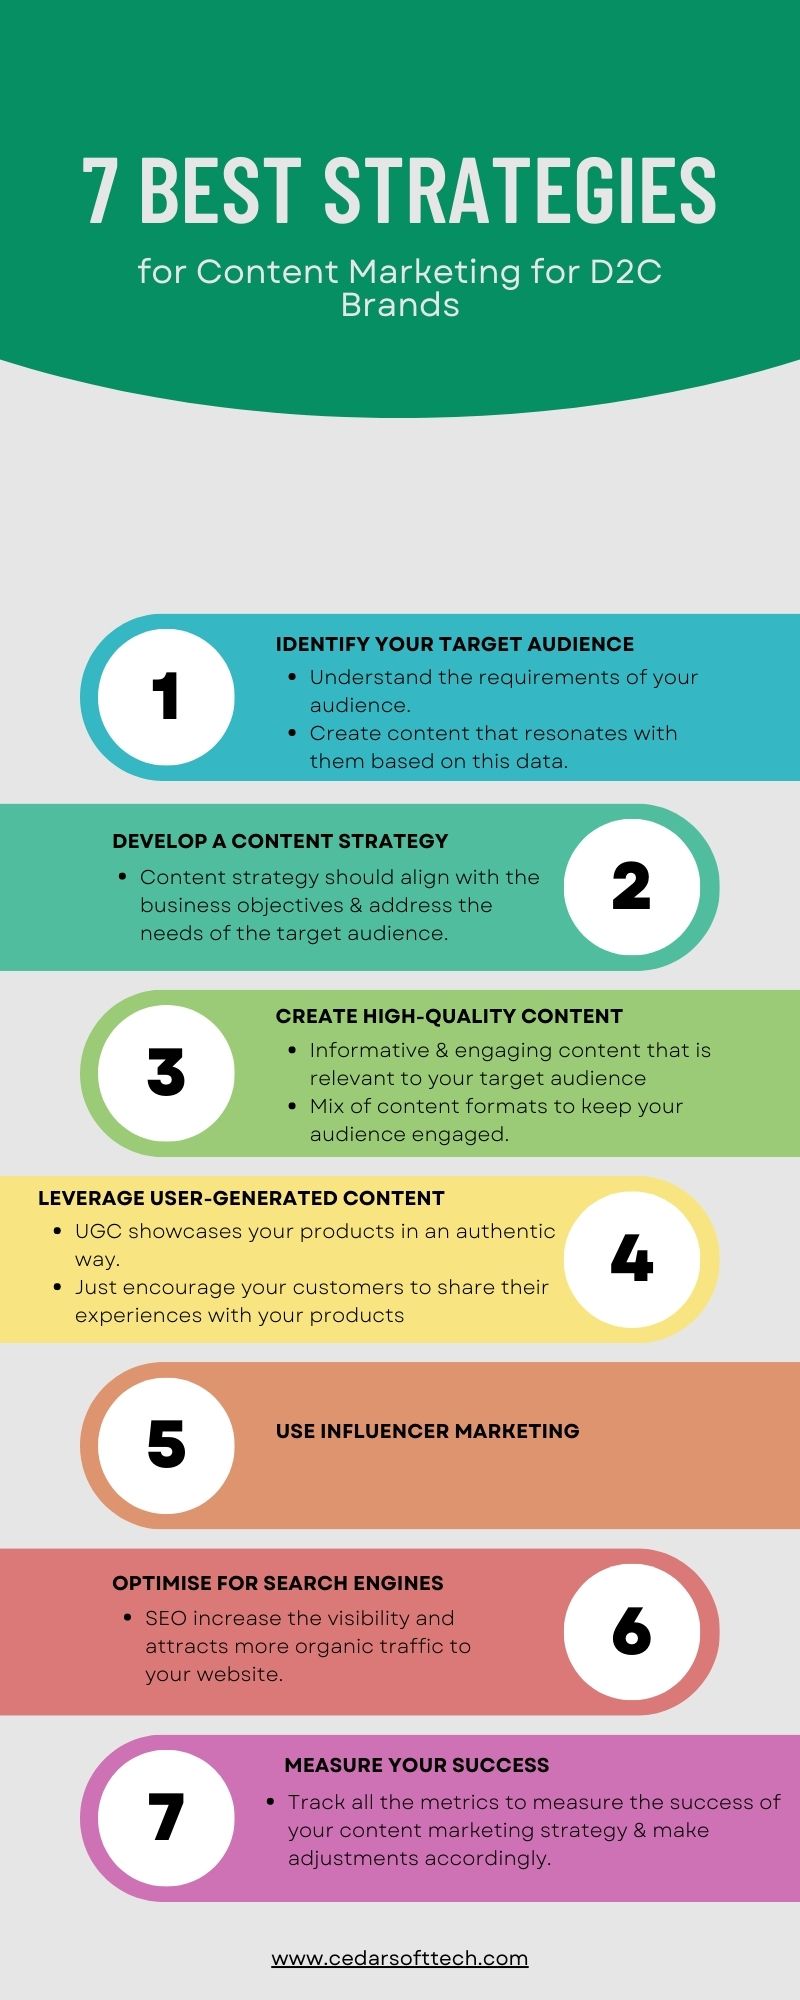 7 best strategies for Content Marketing for D2C Brands